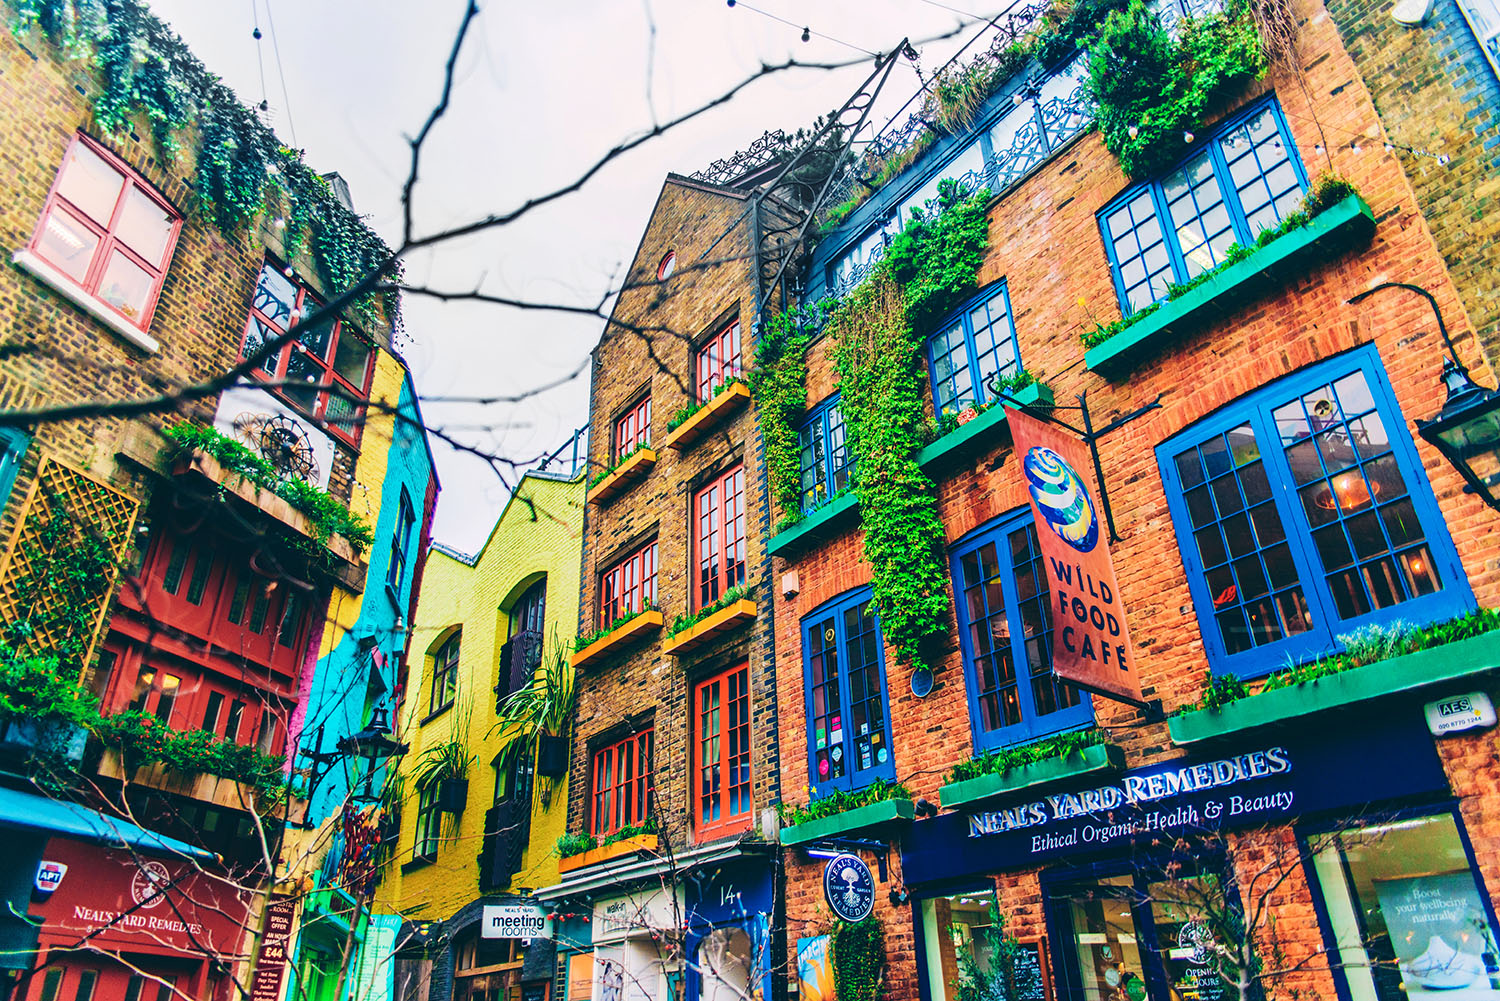 The Colorful Neal's Yard in Covent Garden, London